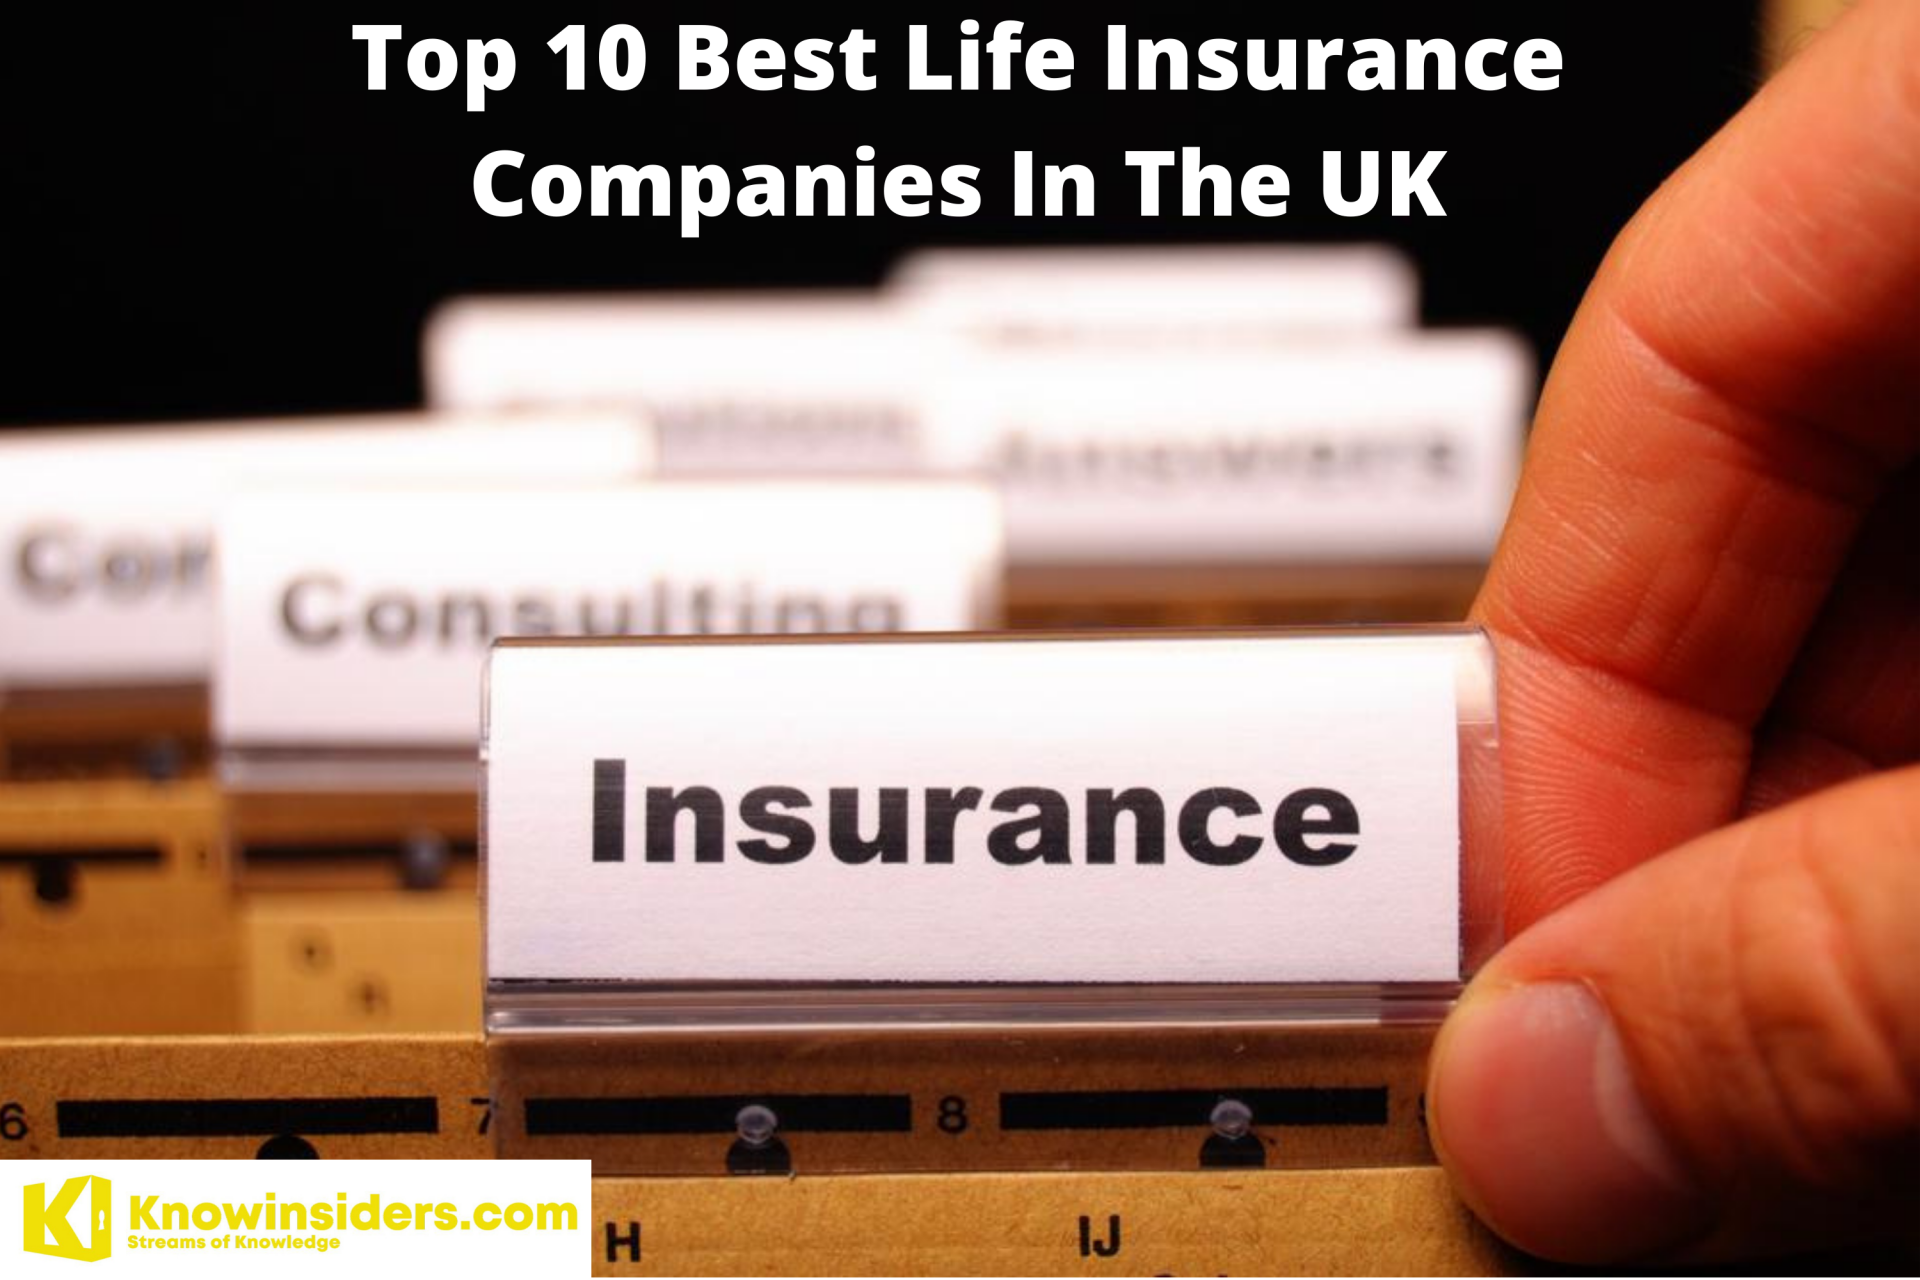 10 Best Life Insurance Companies In The UK: Cheapest Quotes and Good Services